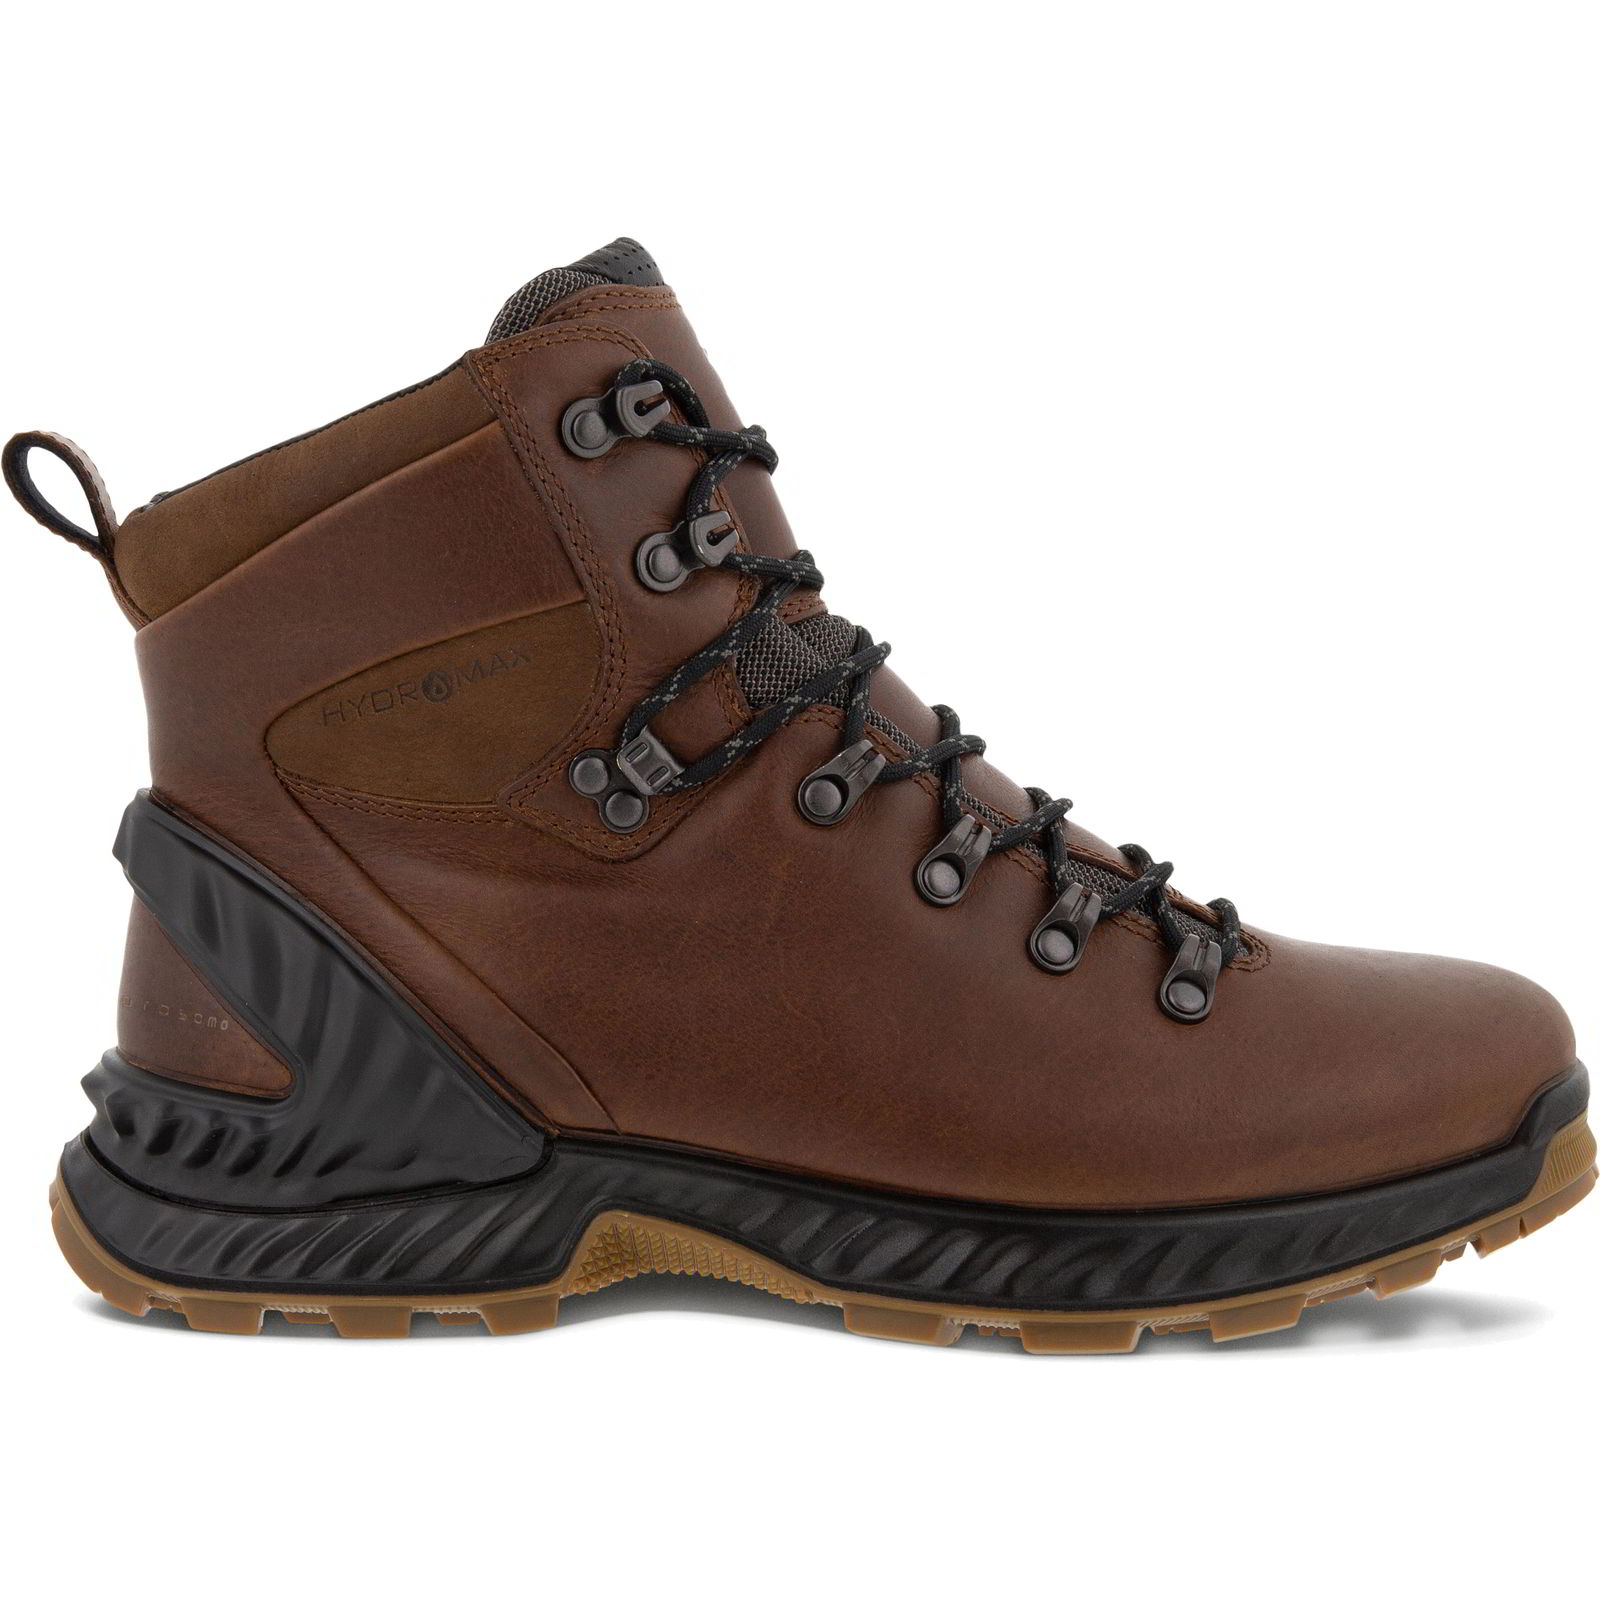 Ecco Shoes Mens Exohike Water Repellent Walking Boots - Cocoa Brown 2951